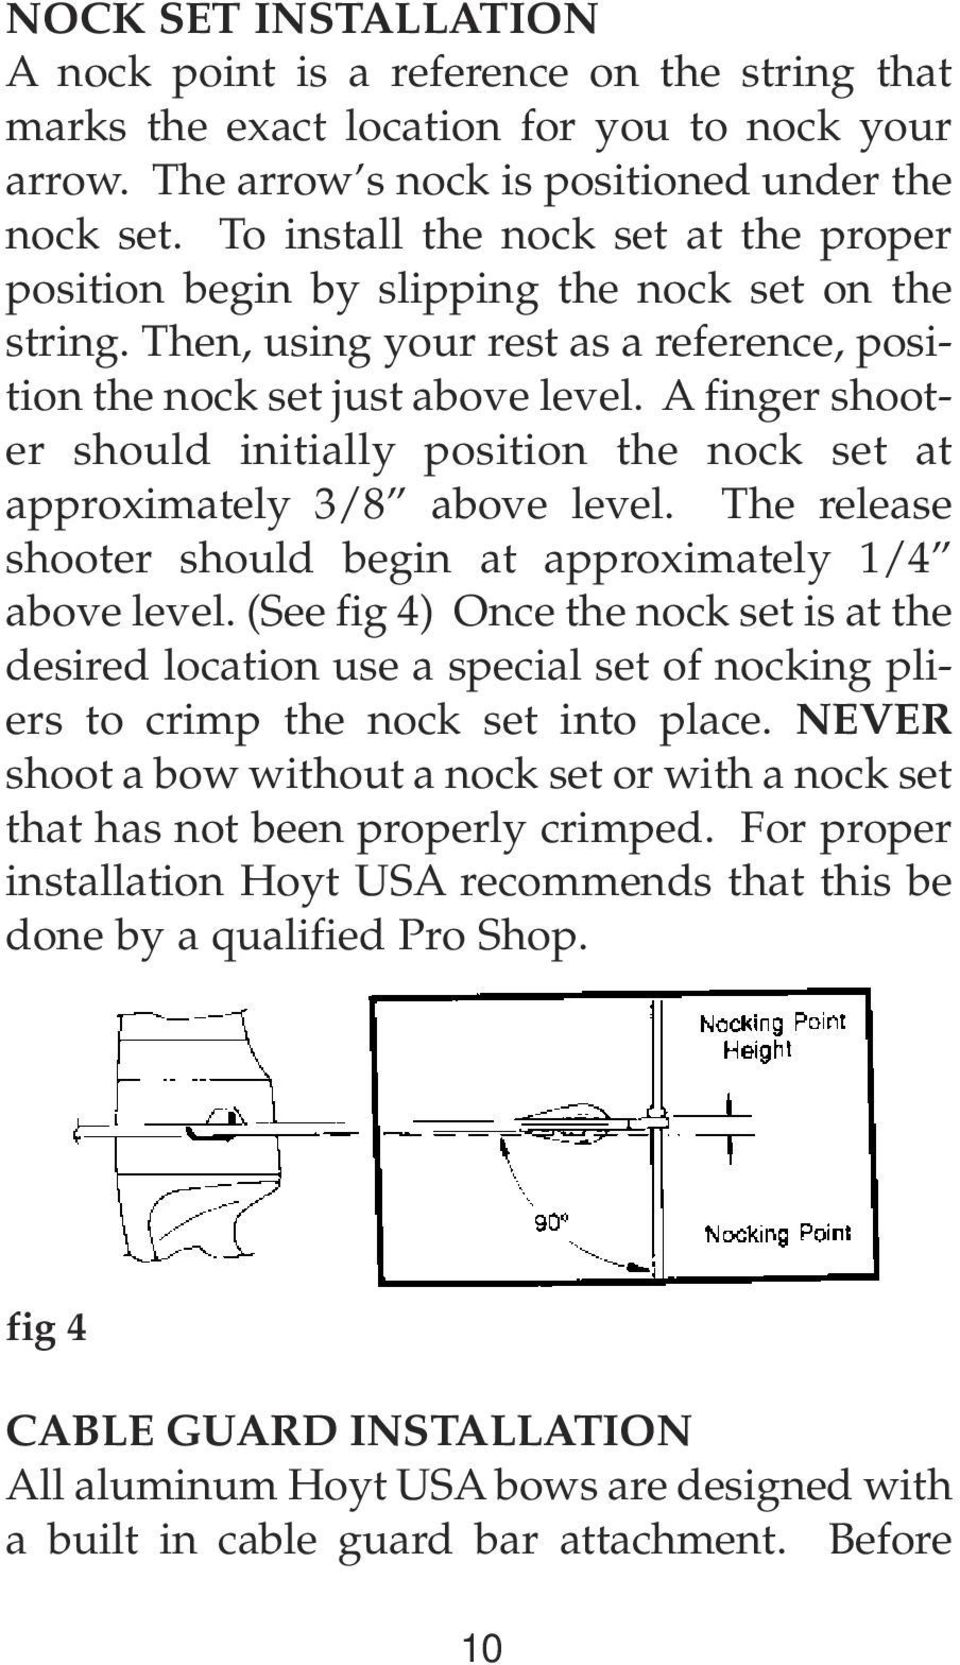 A finger shooter should initially position the nock set at approximately 3/8 above level. The release shooter should begin at approximately 1/4 above level.